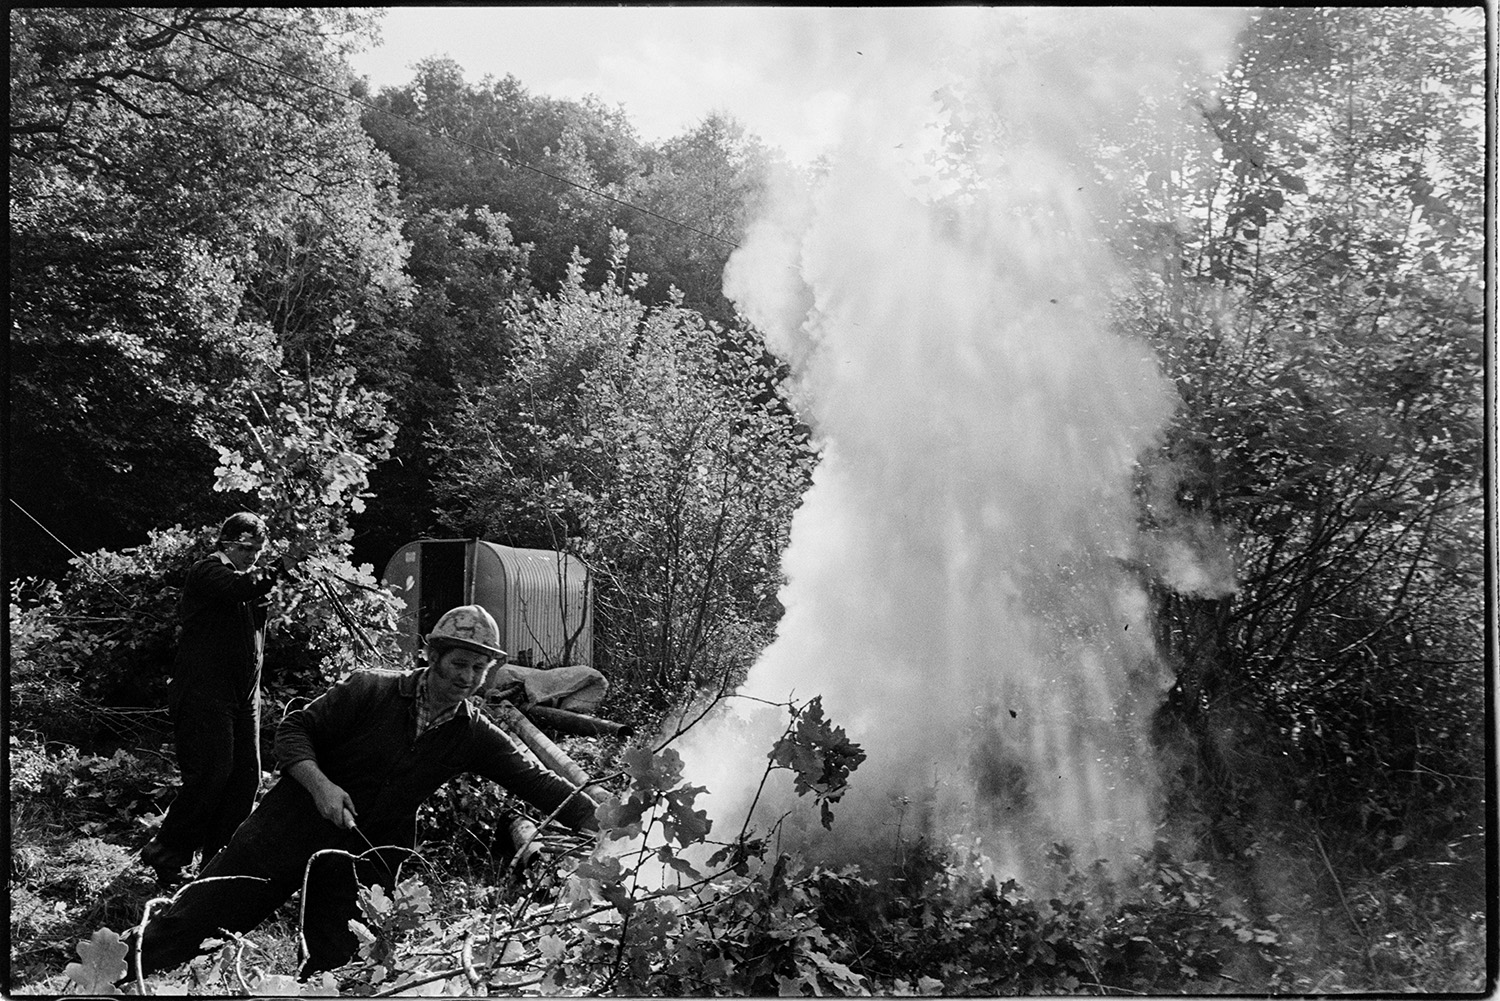 Men burning hedge cuttings during bridge renovation. Bonfire. 
[Two men burning hedge trimmings on a bonfire at Addisford, Dolton. Trees and a corrugated iron shed can be seen in the background.]